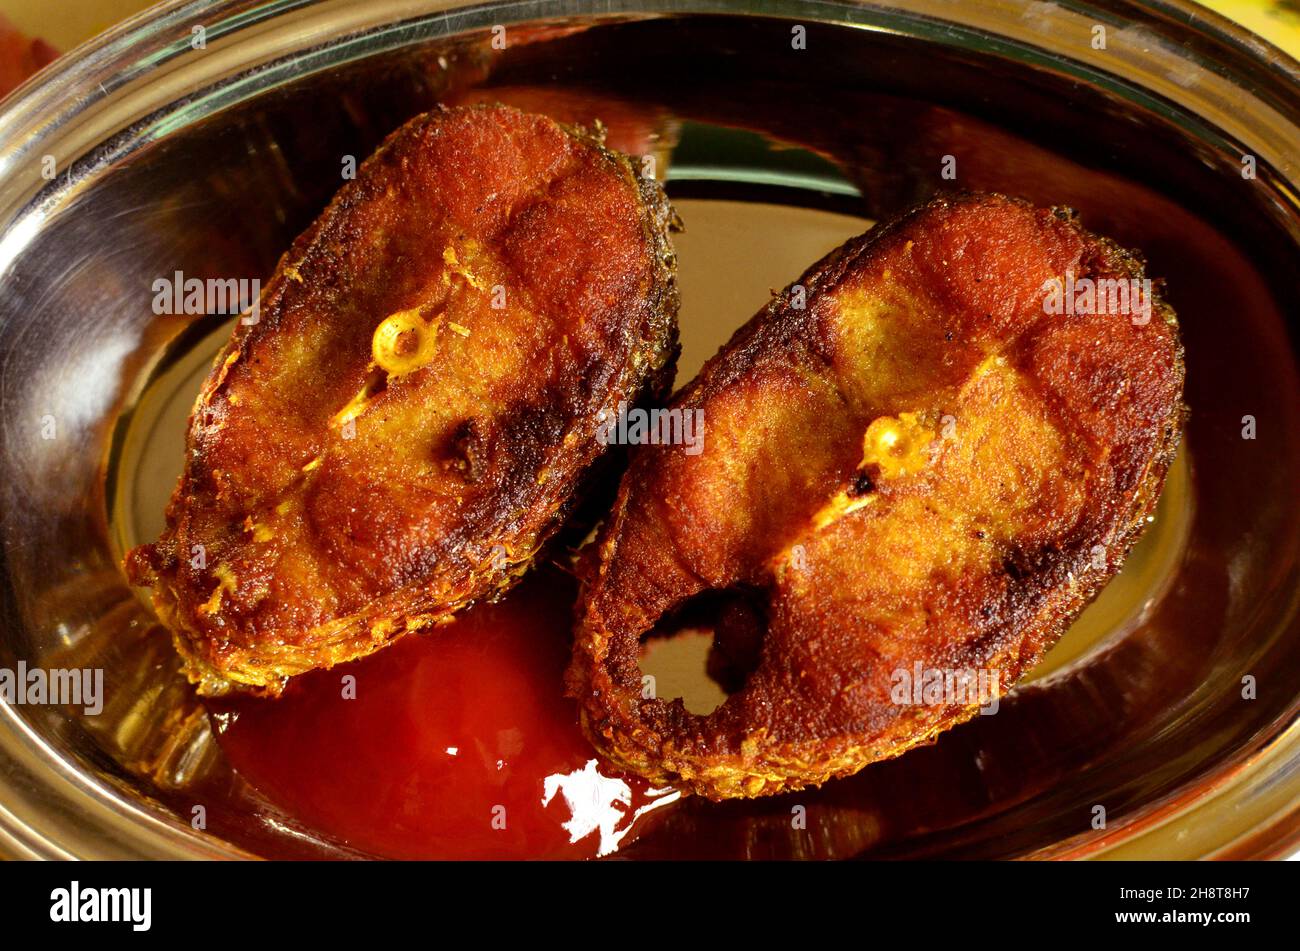 Fried delicious fish of Bengalis , Fish Fry , Fried fish with red chilli powder Stock Photo